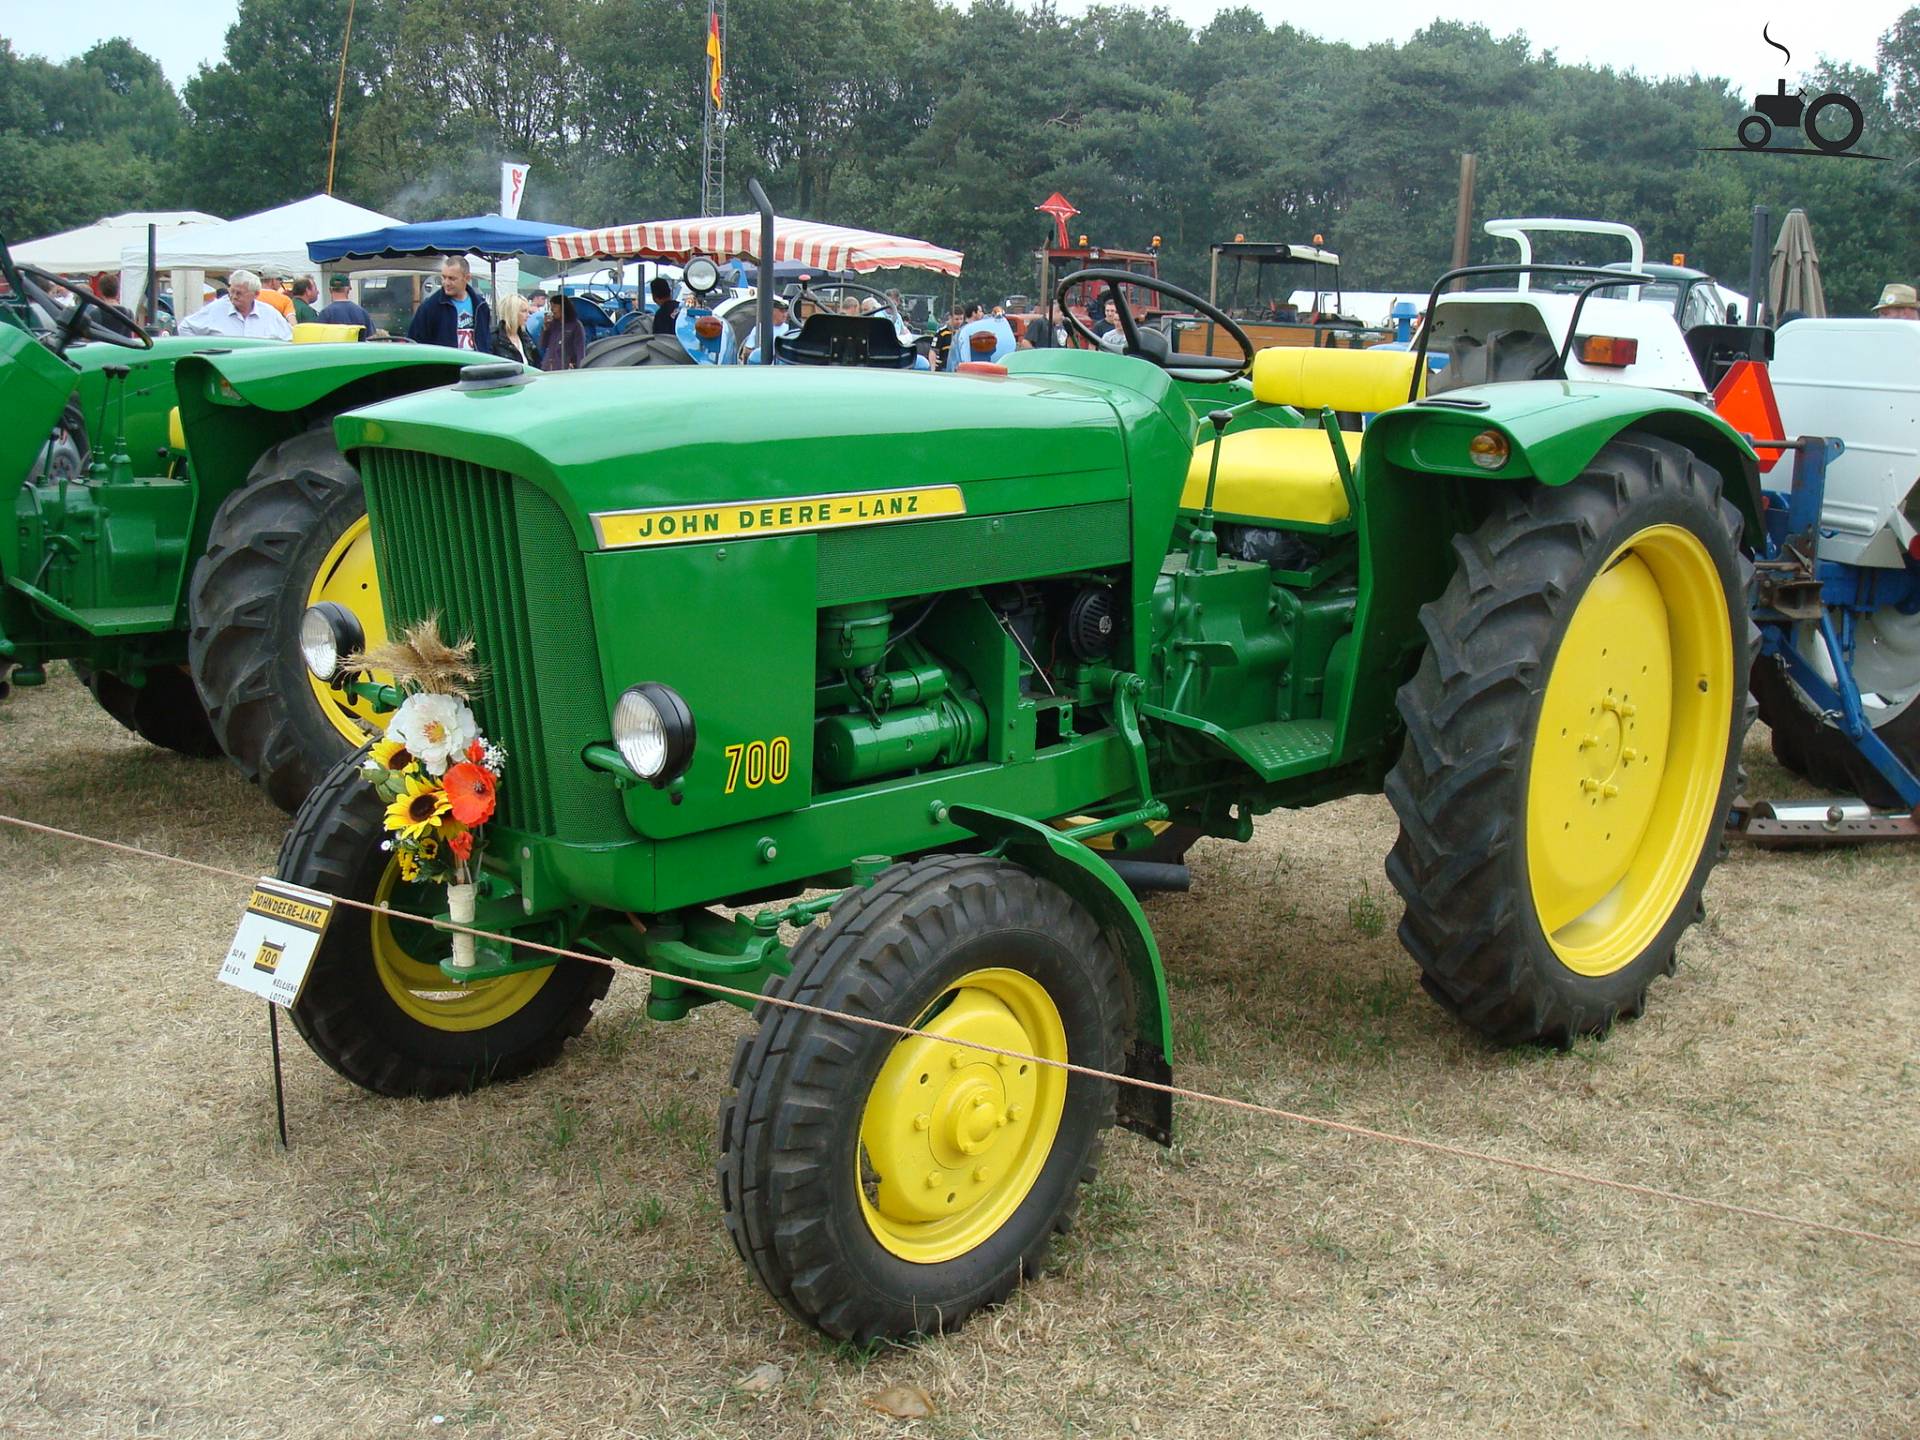 ... Lanz 700 Specs and data - Everything about the John Deere Lanz 700